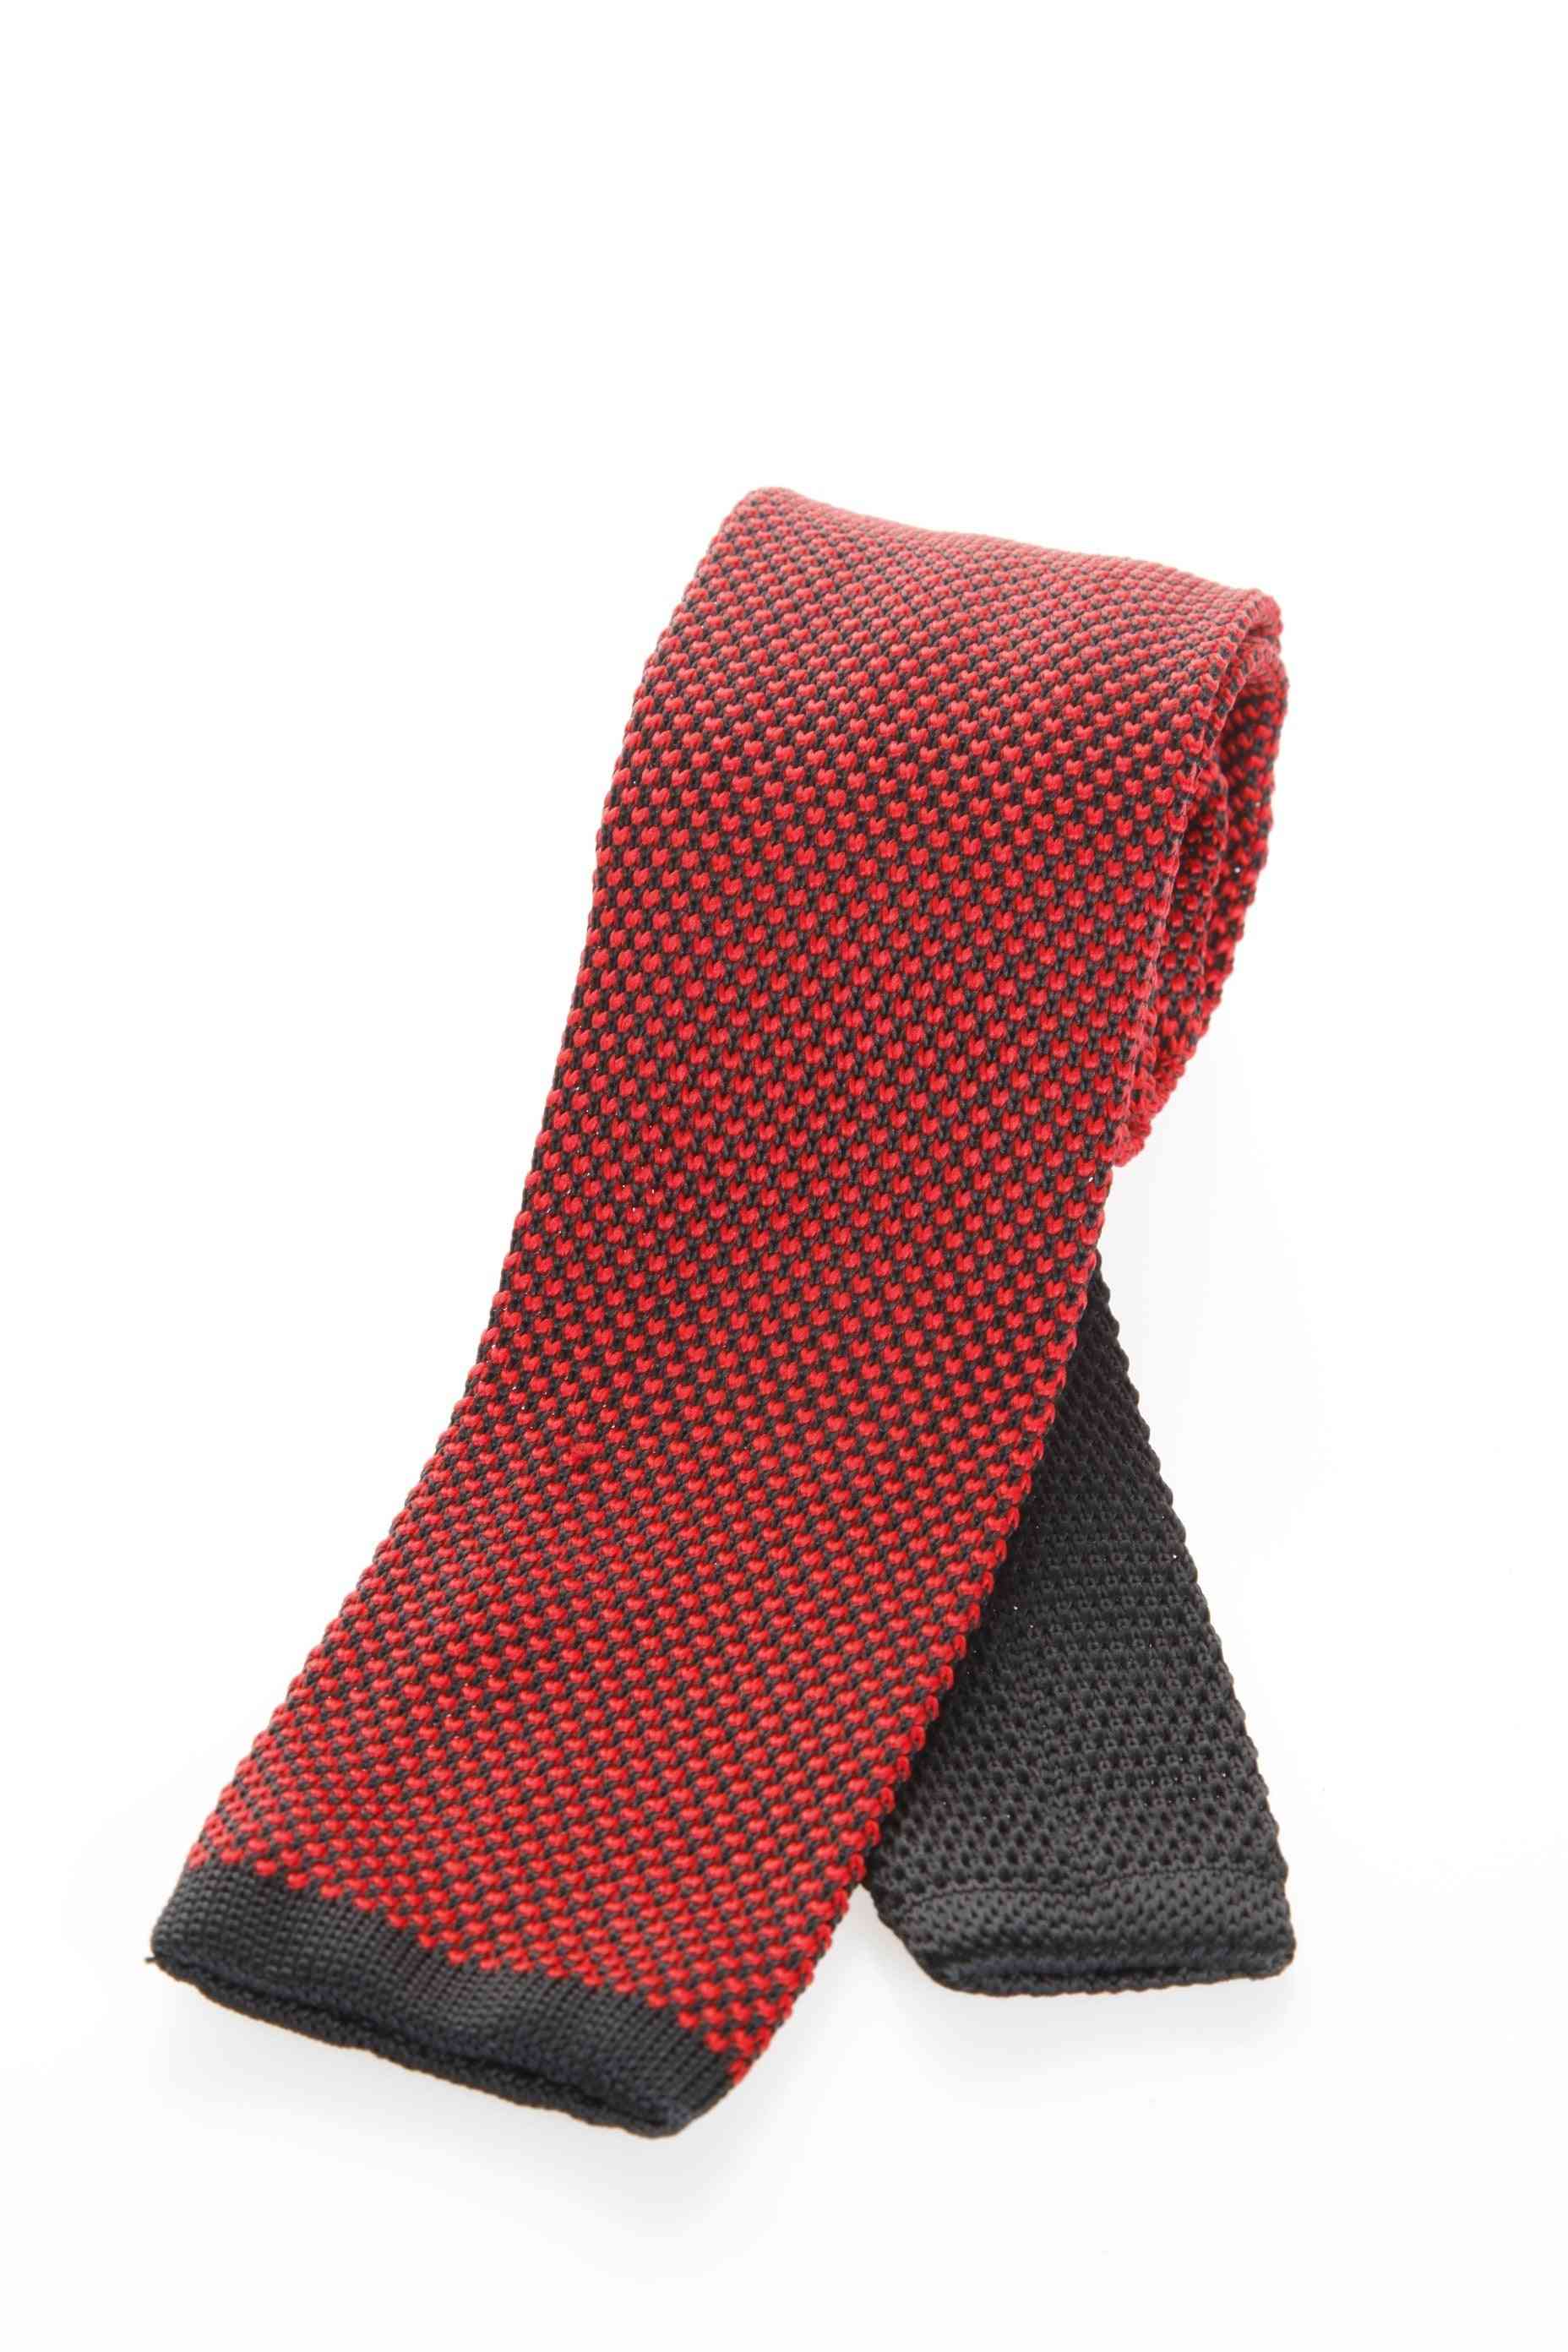 Stylish And Elegant Knitted Tie